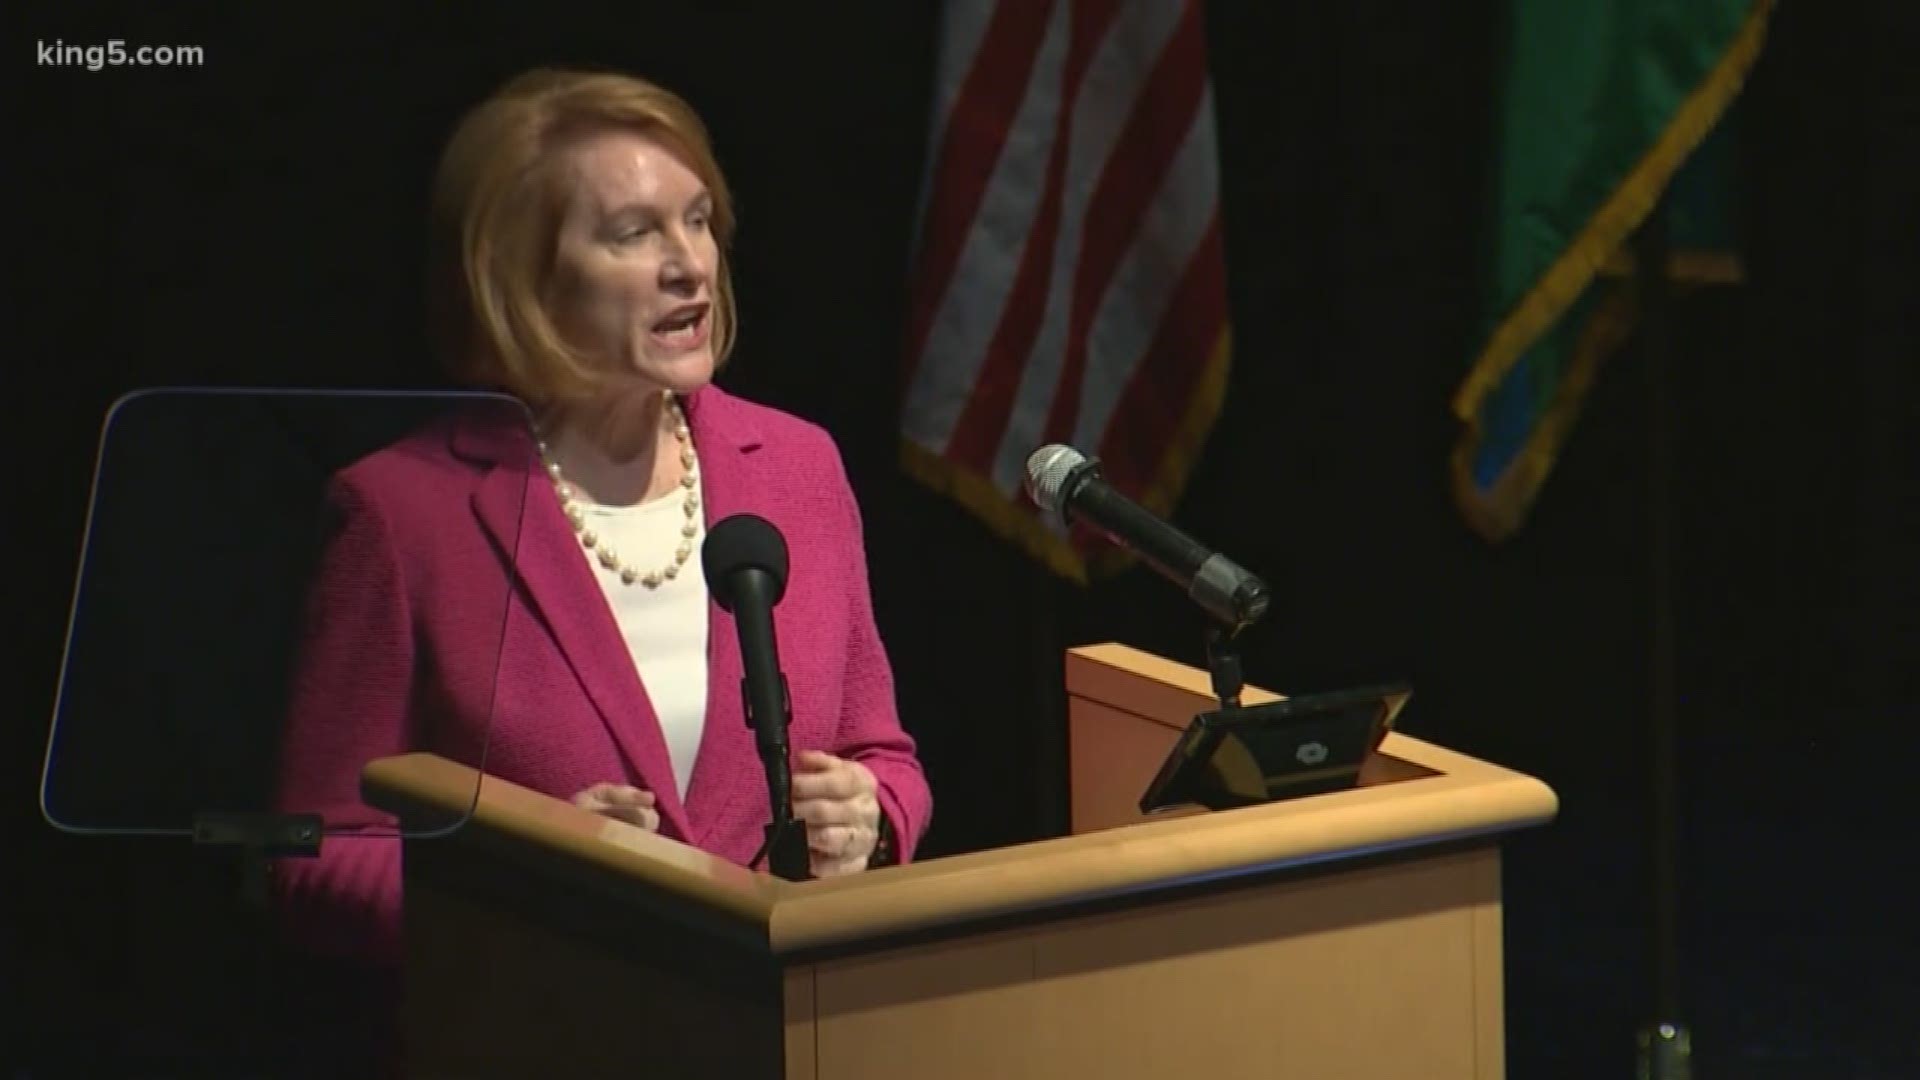 Seattle Mayor Jenny Durkan says Seattle is at a turning point. She gave her State of the City address and stressed the urgency of meaningful solutions to homelessness and the lack of affordable housing. KING 5's Angela Poe Russell has the details.